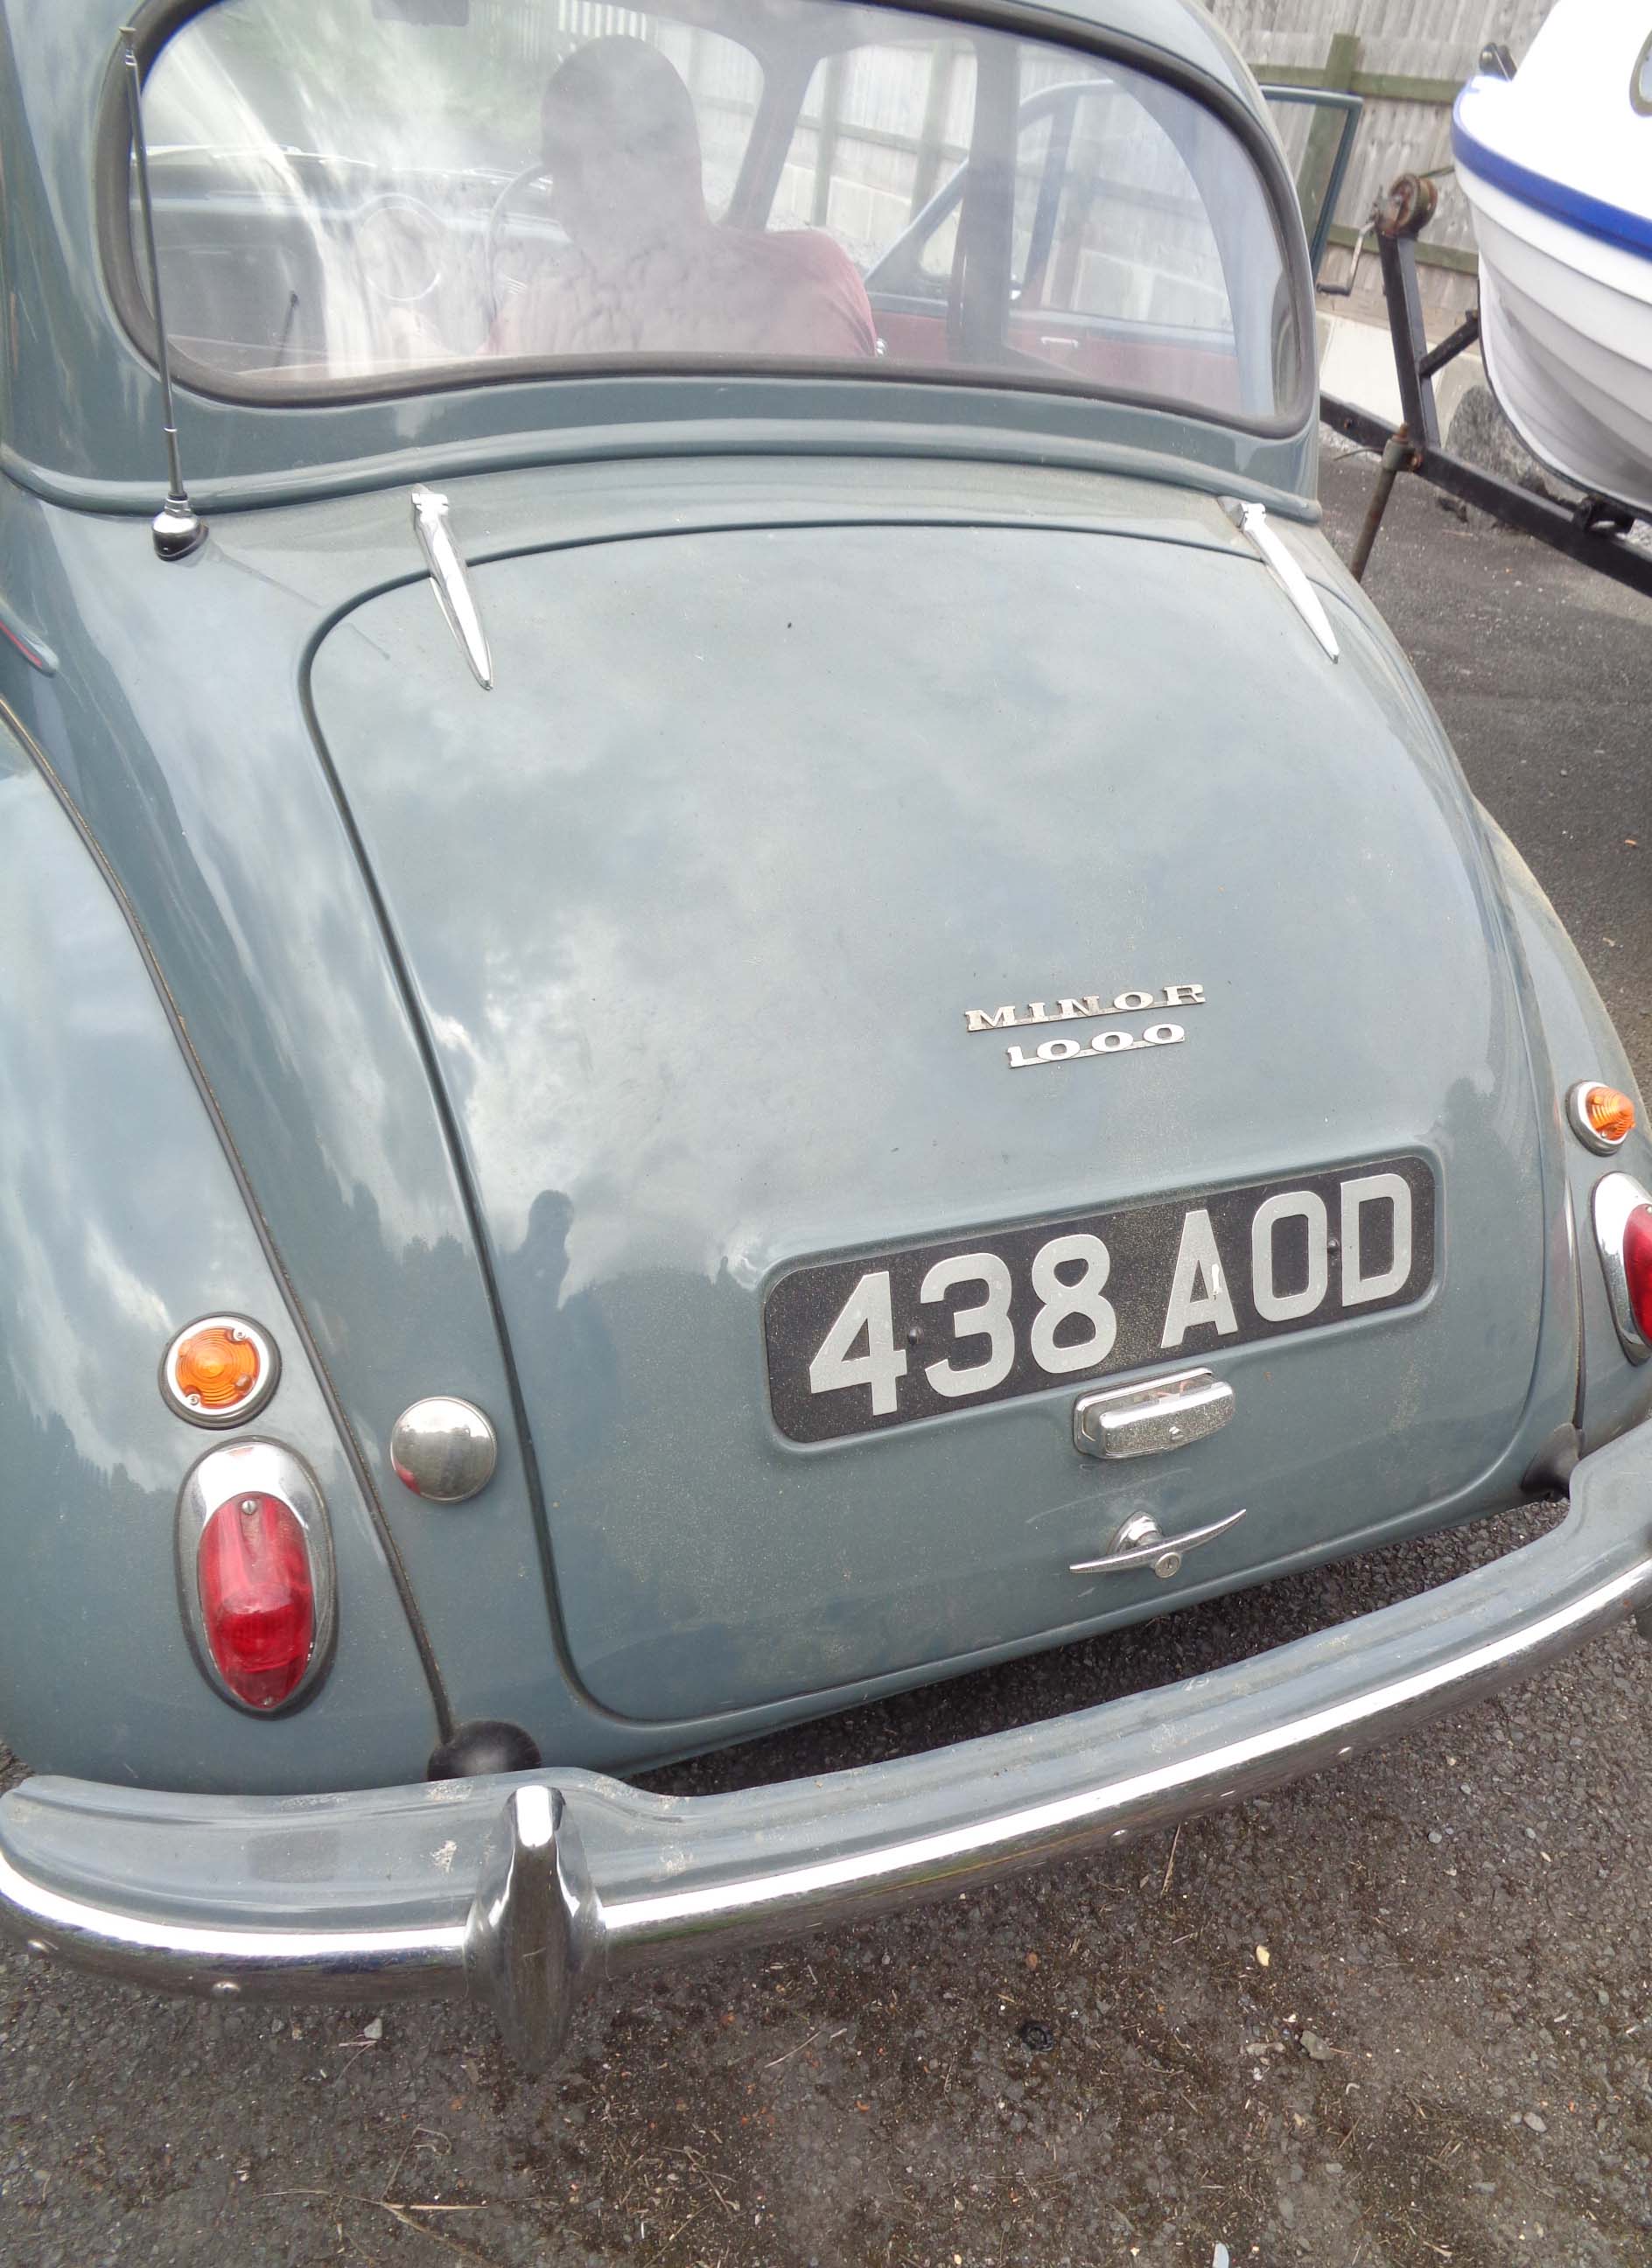 A 1959 Morris Minor 1000 saloon car in restored condition and grey livery with burgundy red - Image 8 of 17